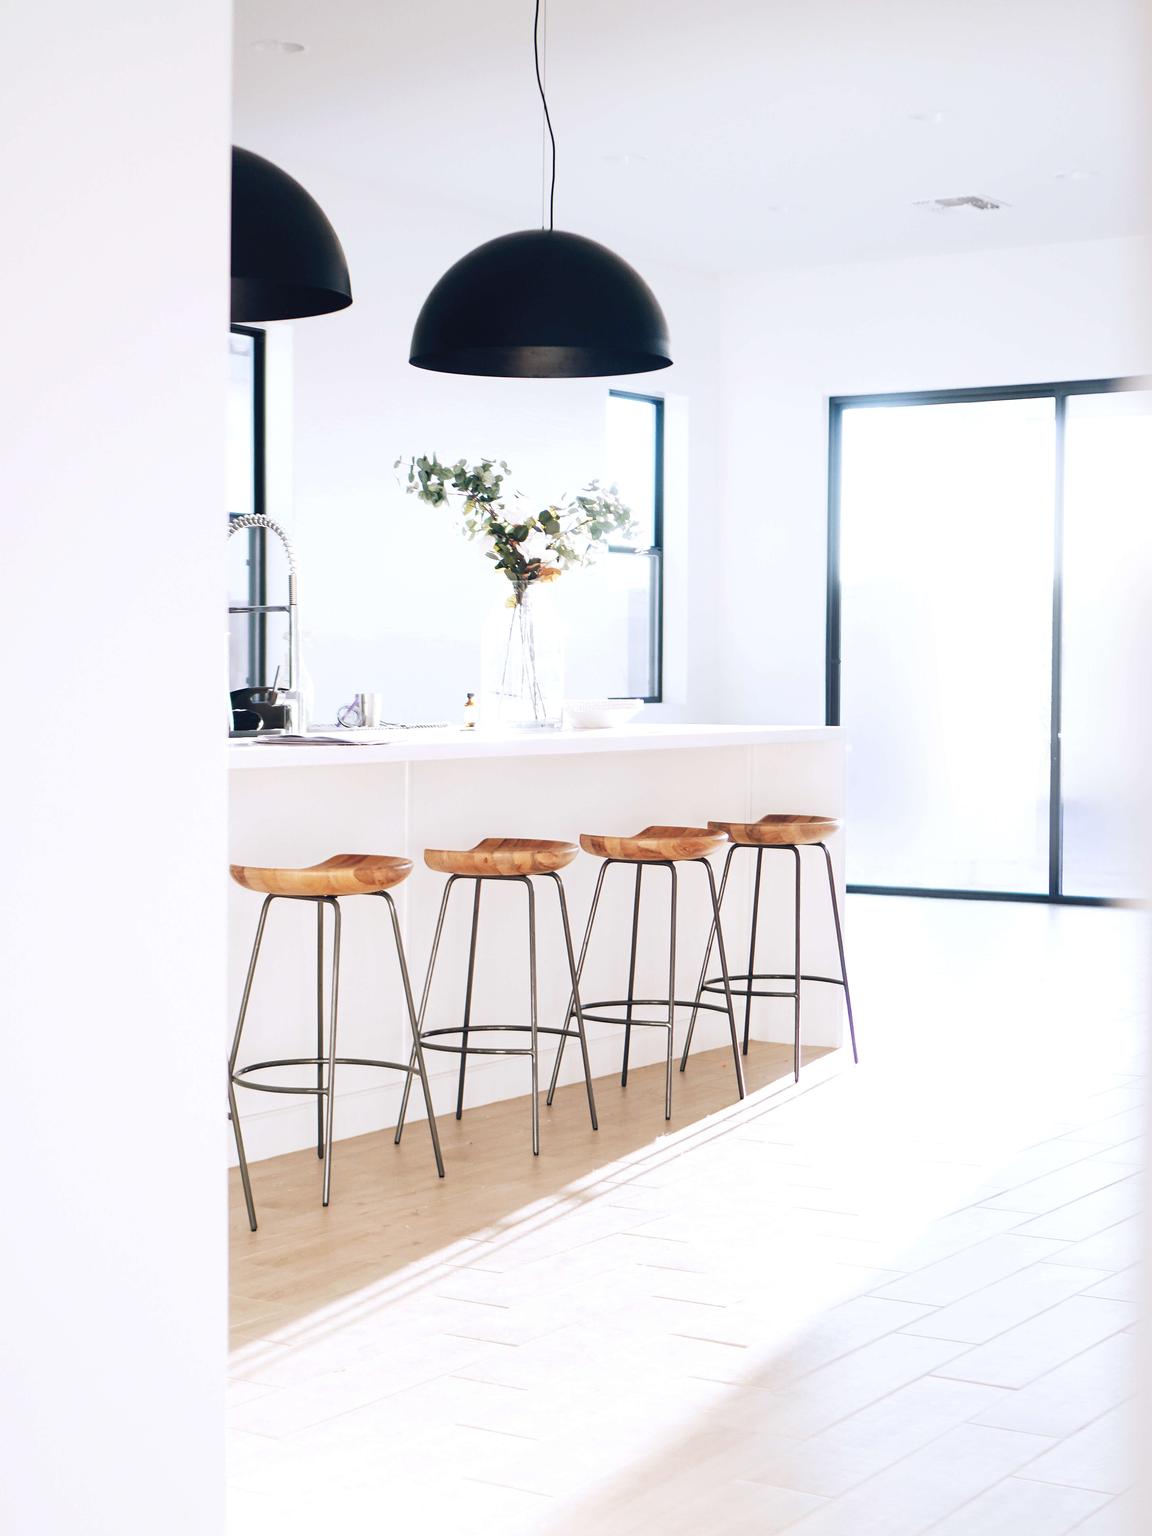 Bright interior with wooden bar charis on a counter